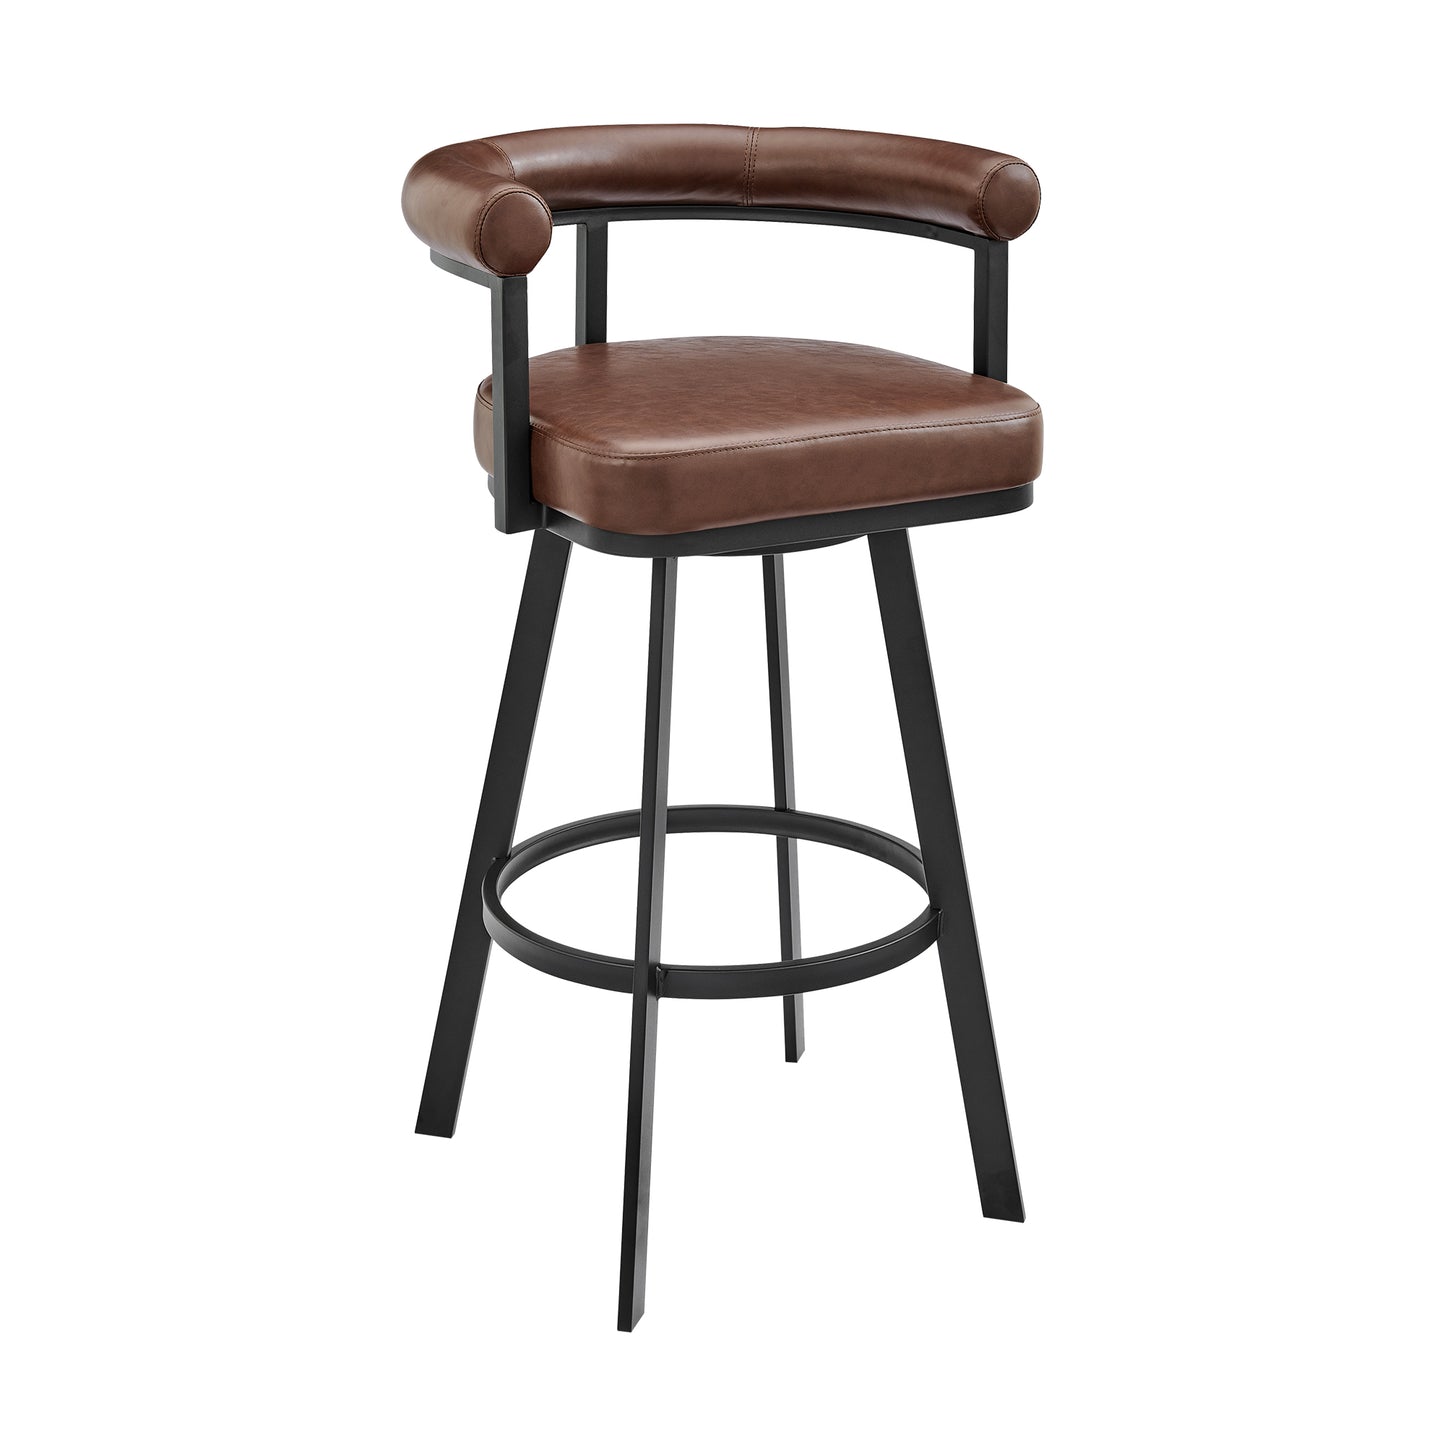 Magnolia 26" Swivel Counter Stool in Black Metal with Brown Faux Leather